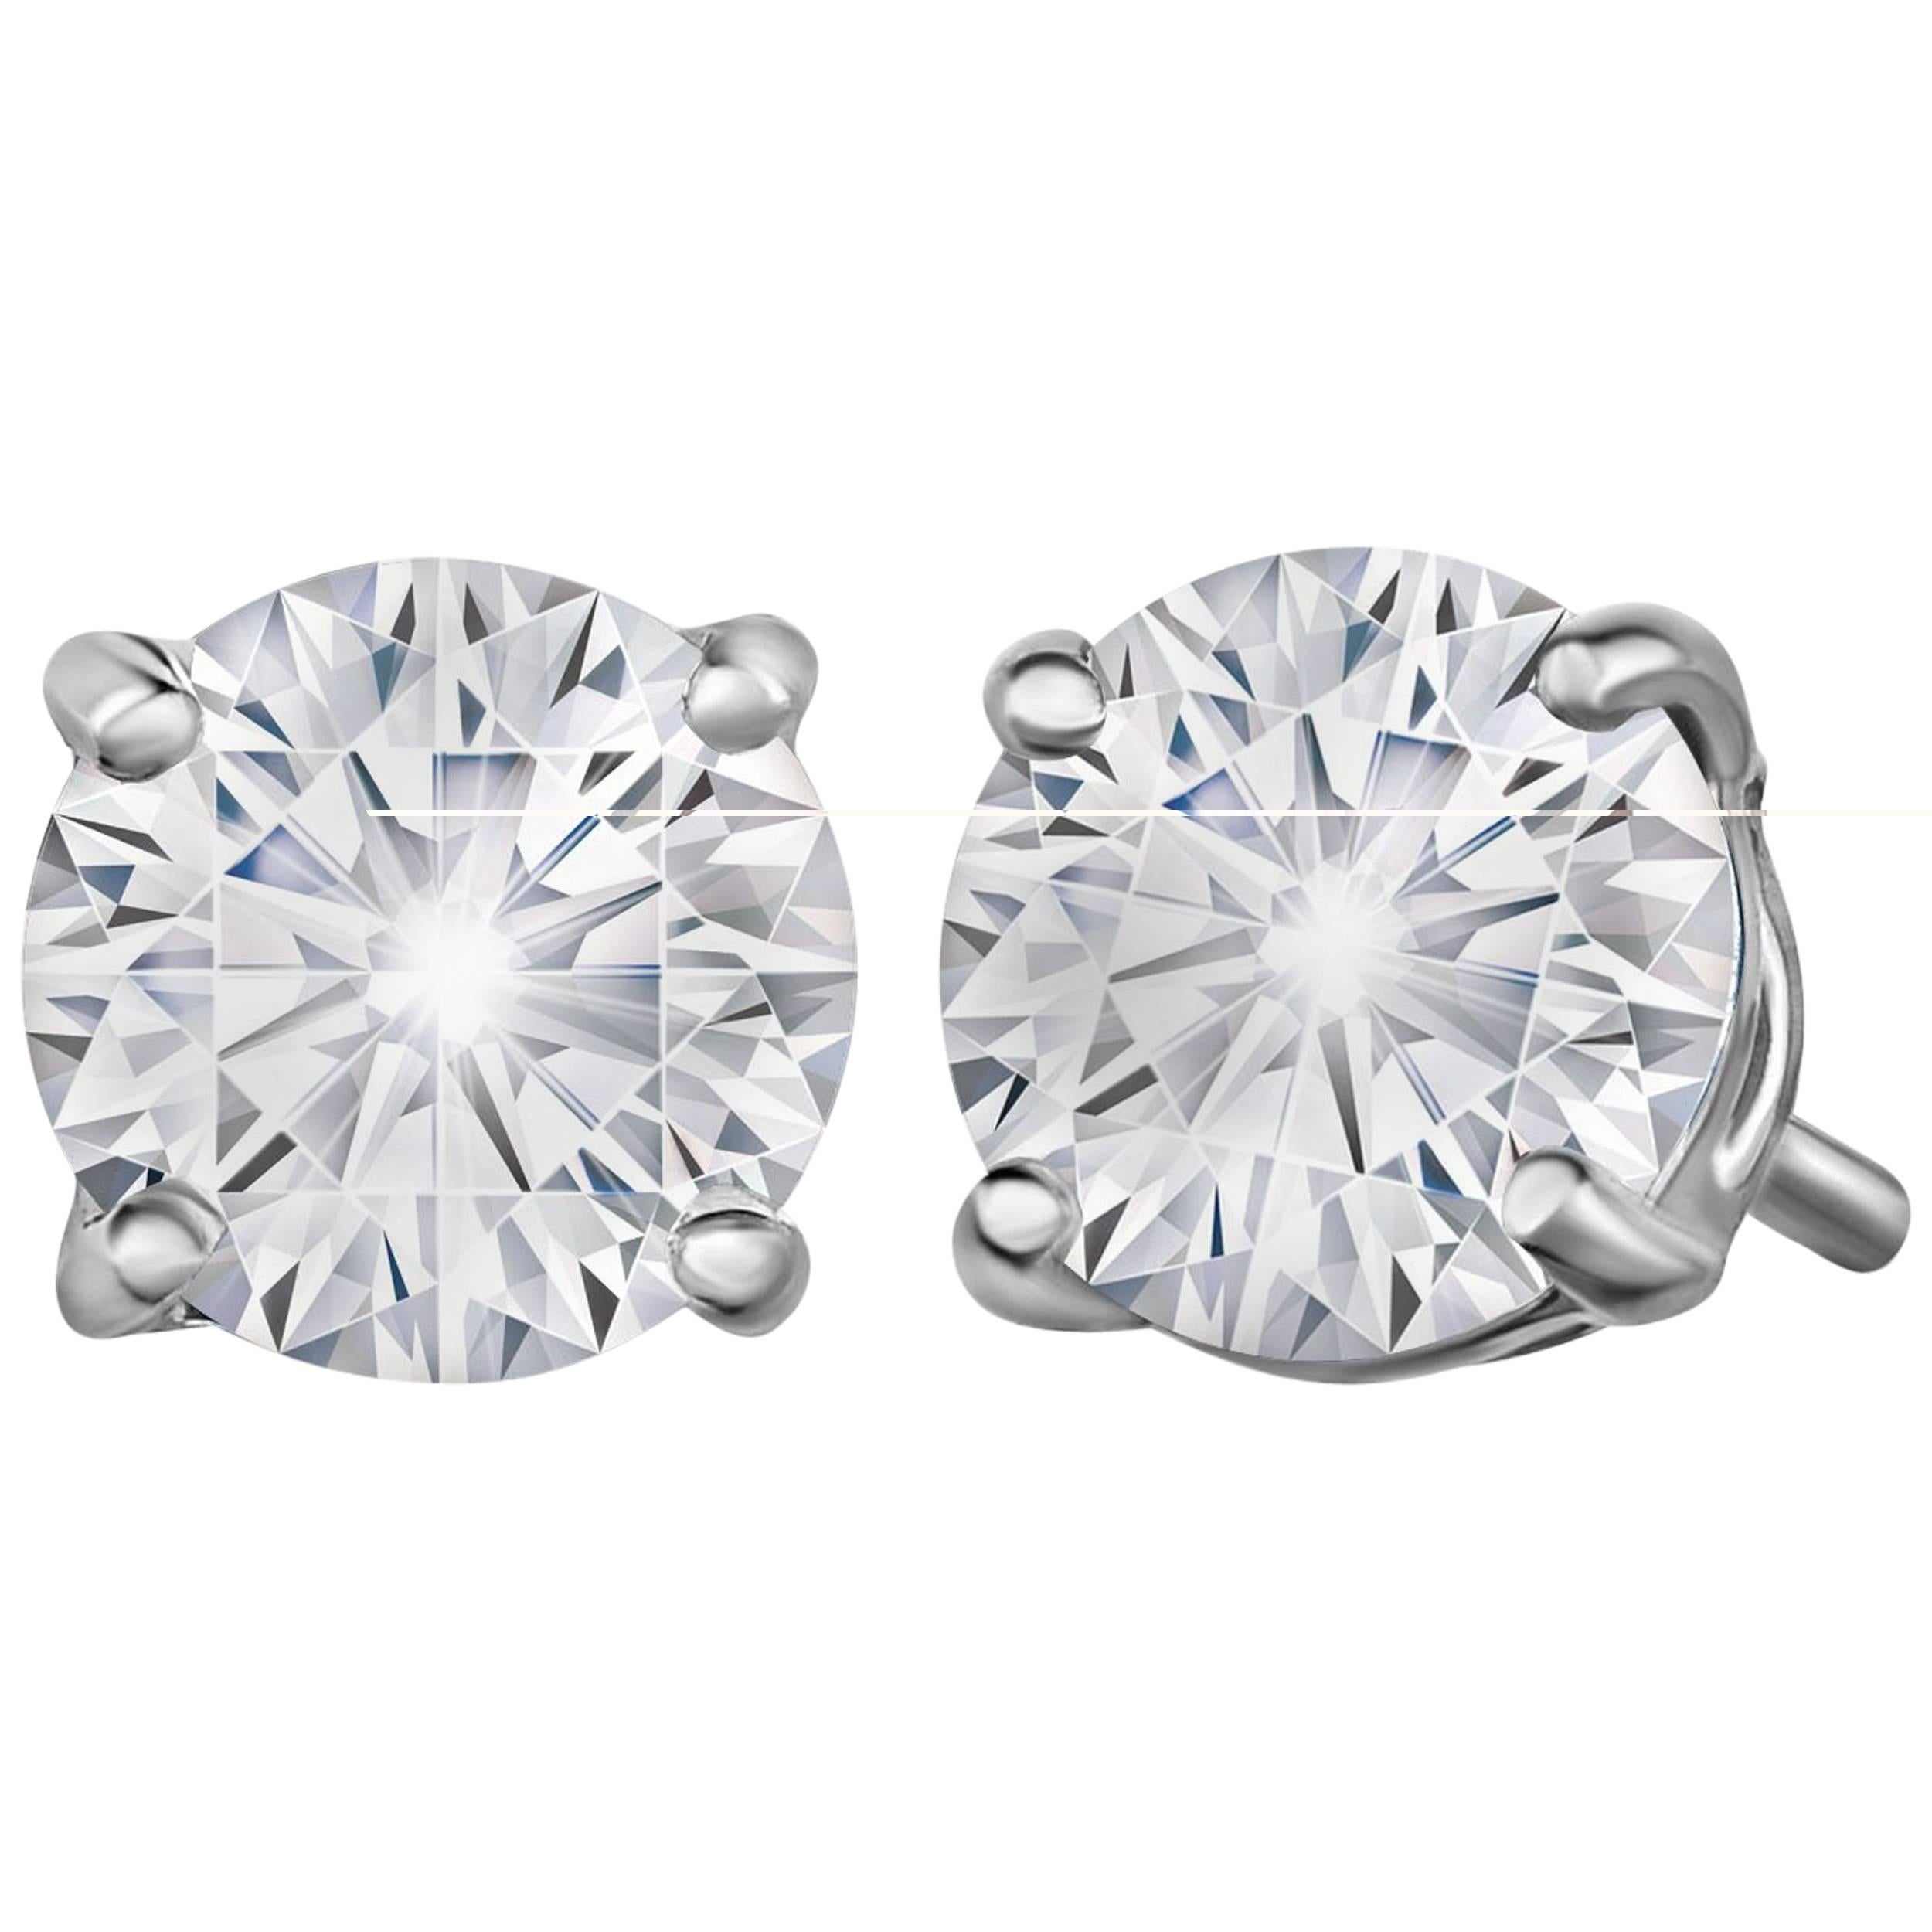 Marisa Perry 80 Point Forevermark Diamond Studs in Platinum For Sale